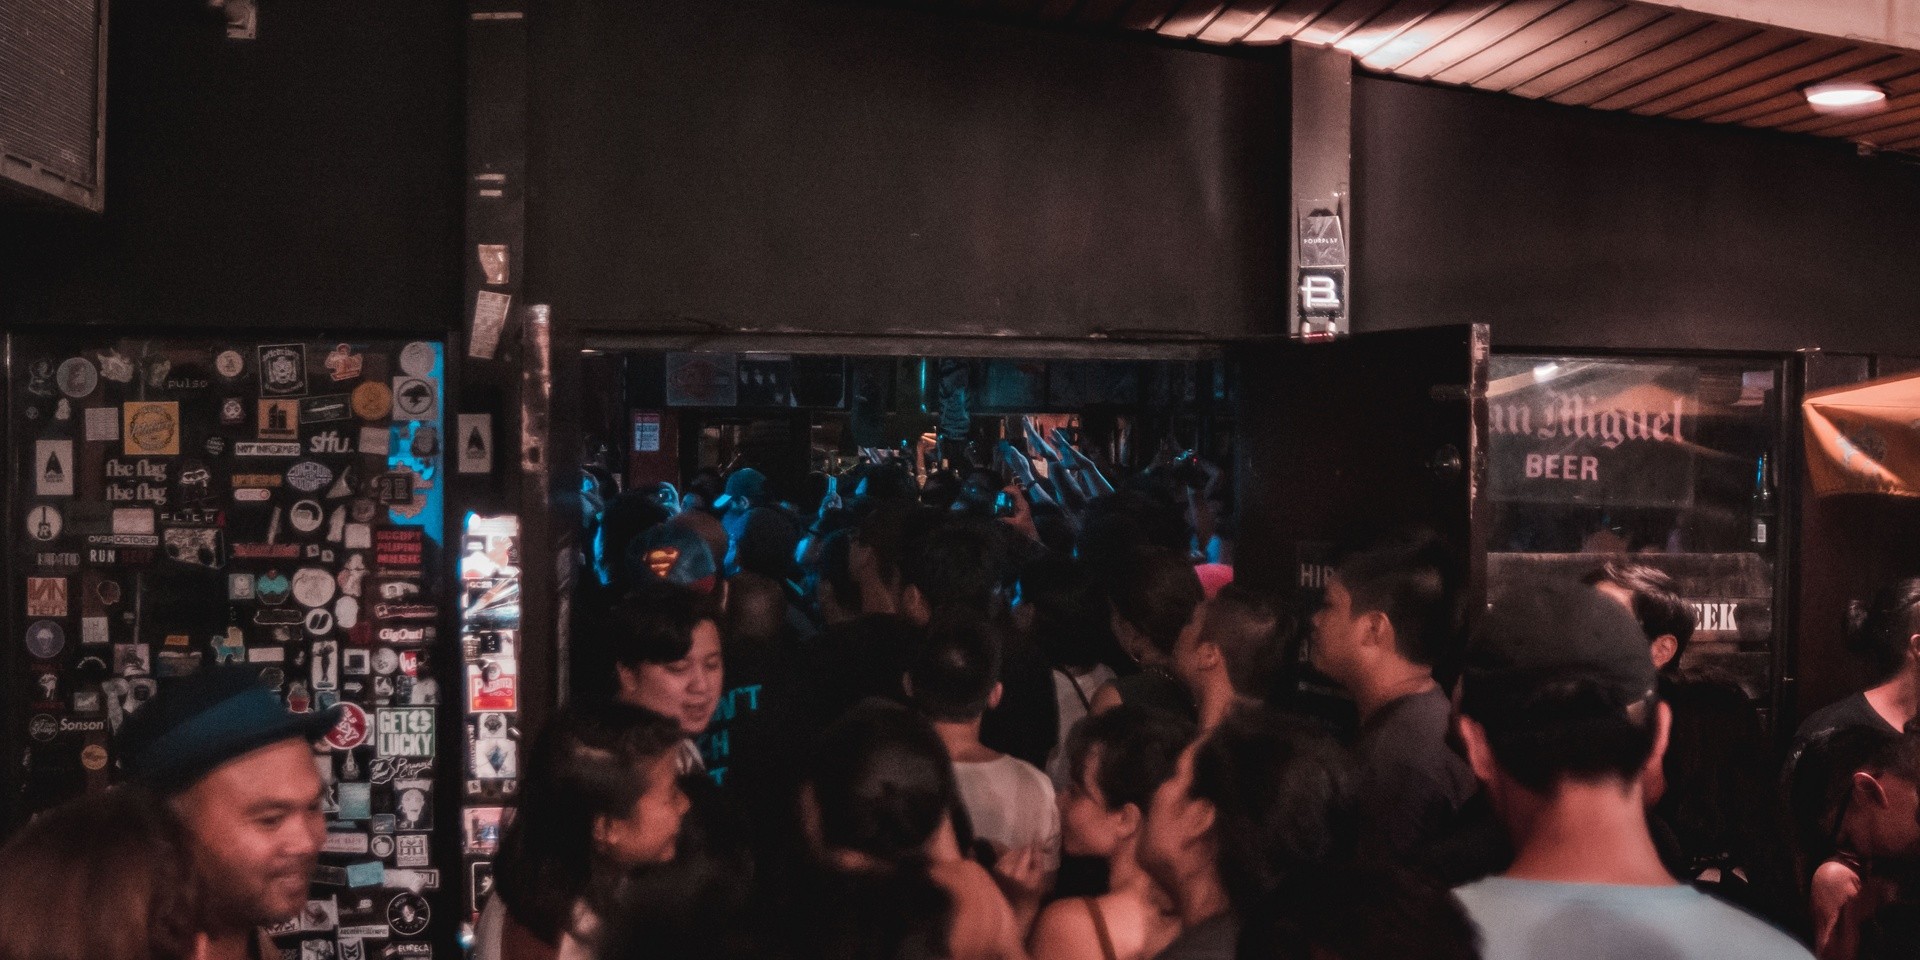 "We're at the end of the road." Route 196 to shut its doors